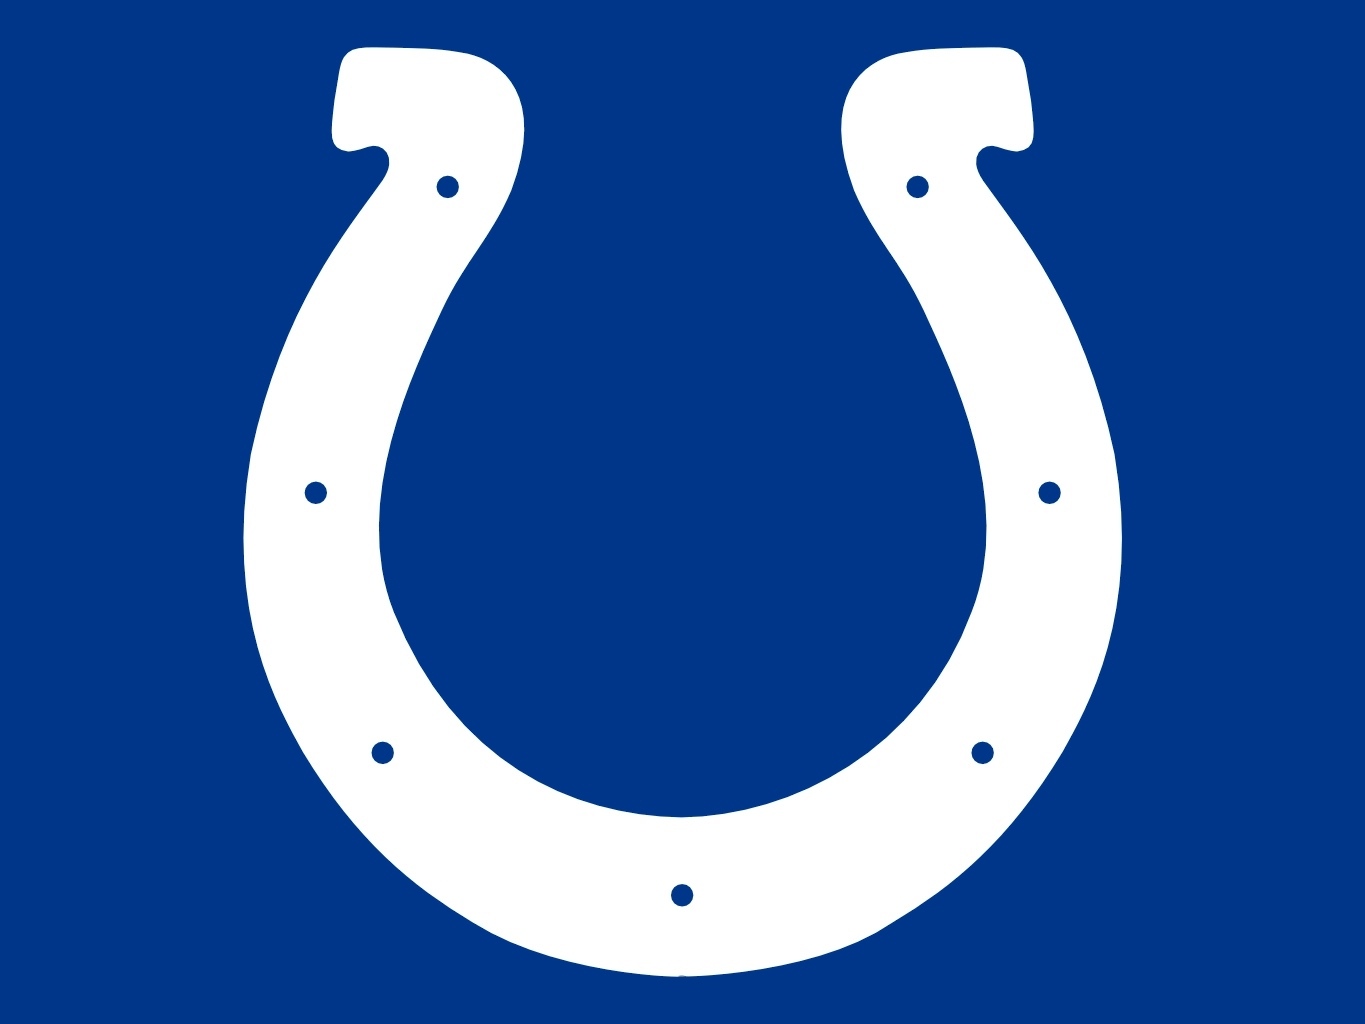 Ocala Post - 2014 Indianapolis Colts preview